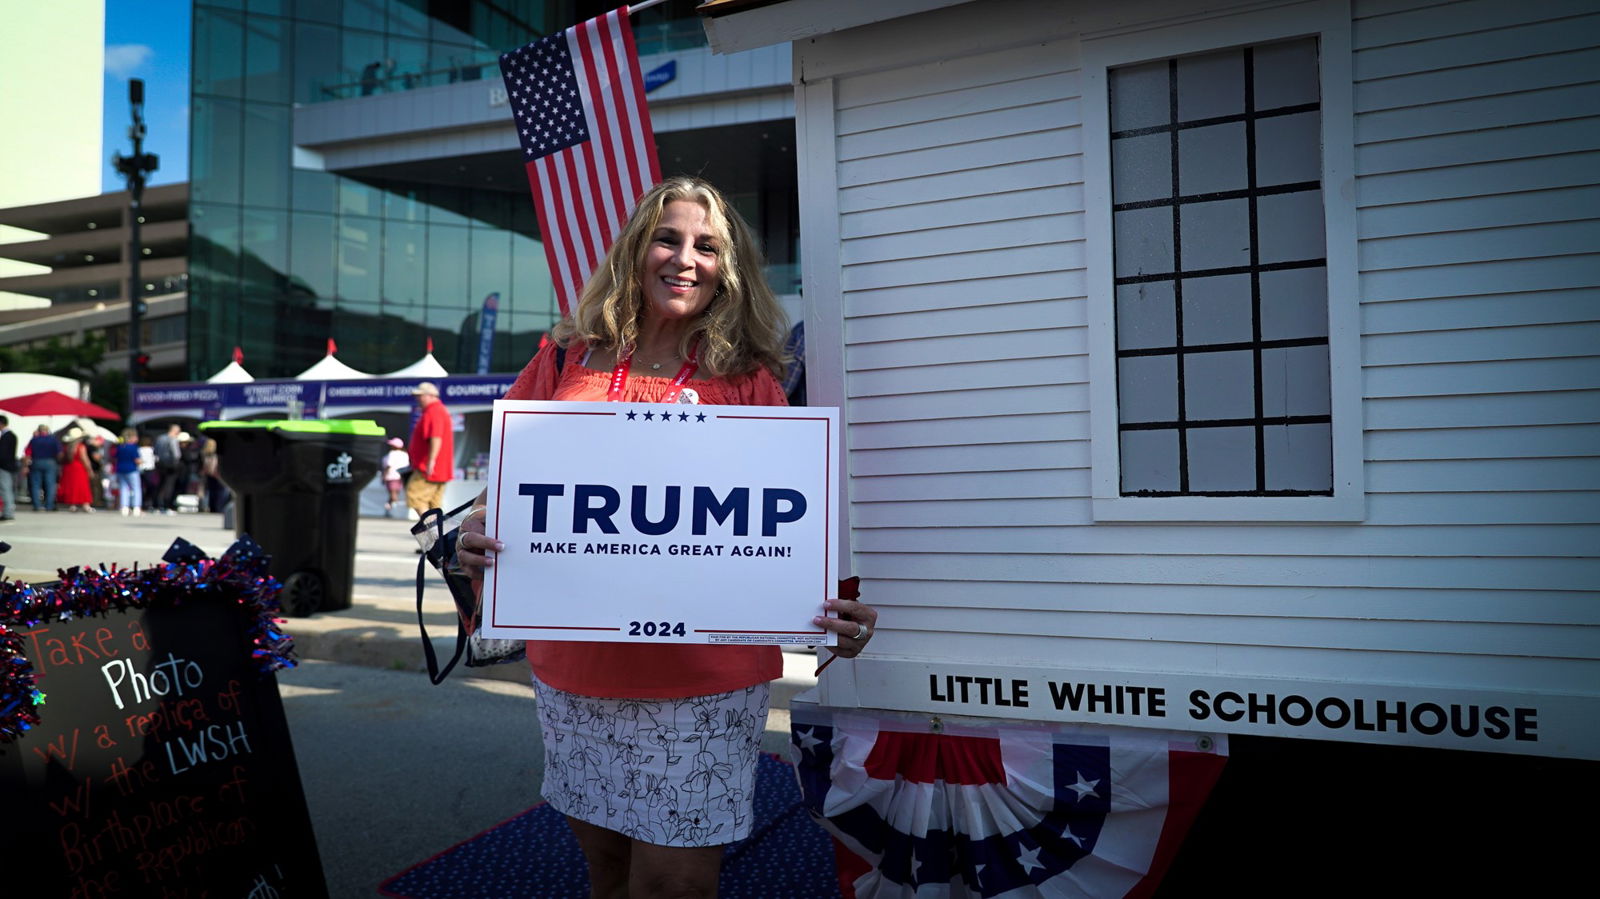 A woman wearing a white skirt and red top holds a TRUMP sign standing in front of a US flag